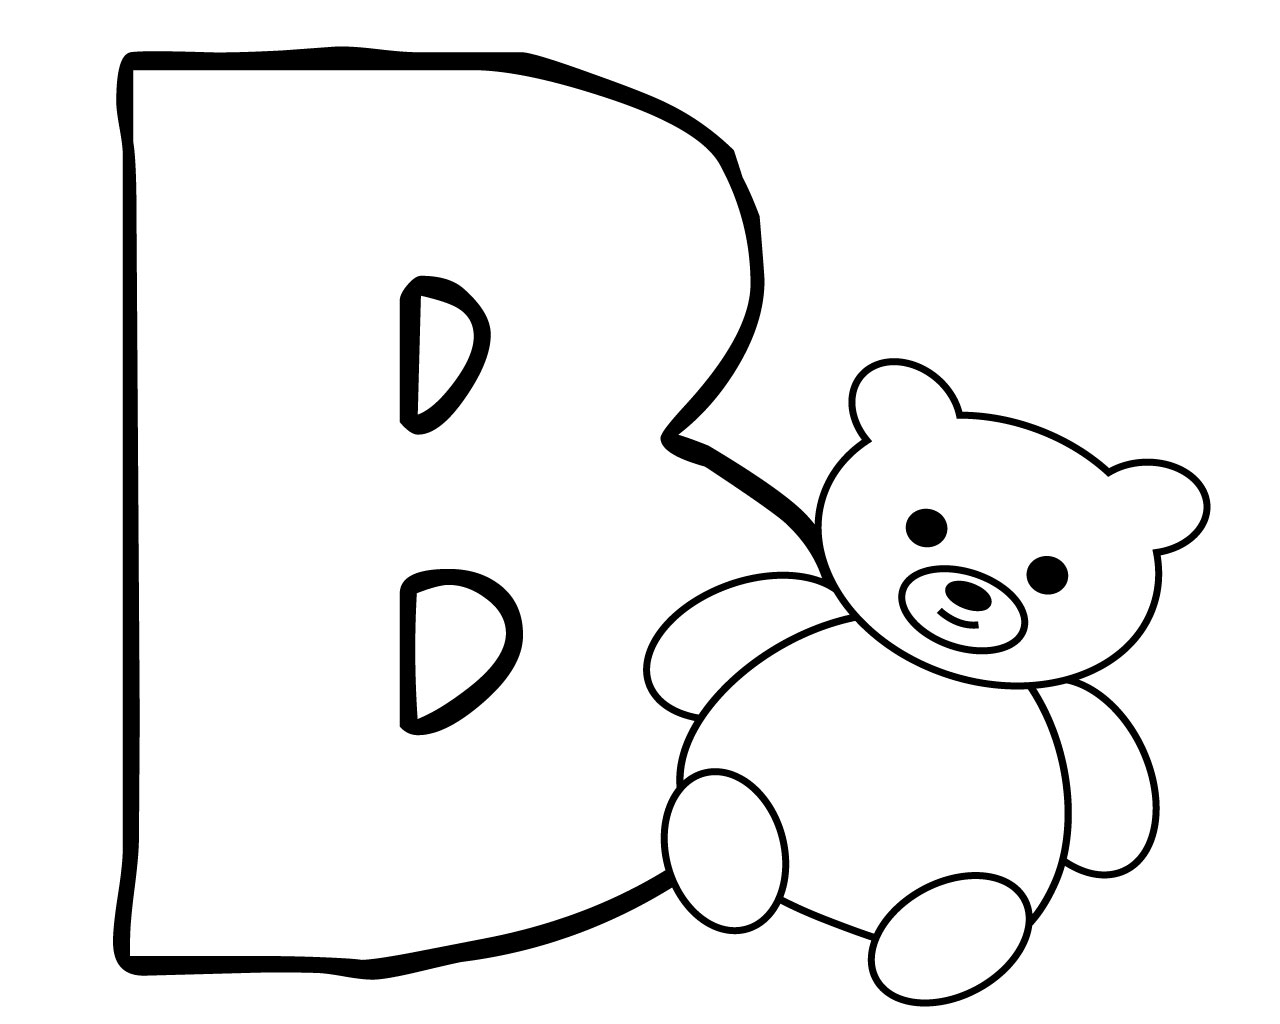 letter-b-coloring-pages-for-preschoolers-free-coloring-pages-for-kids